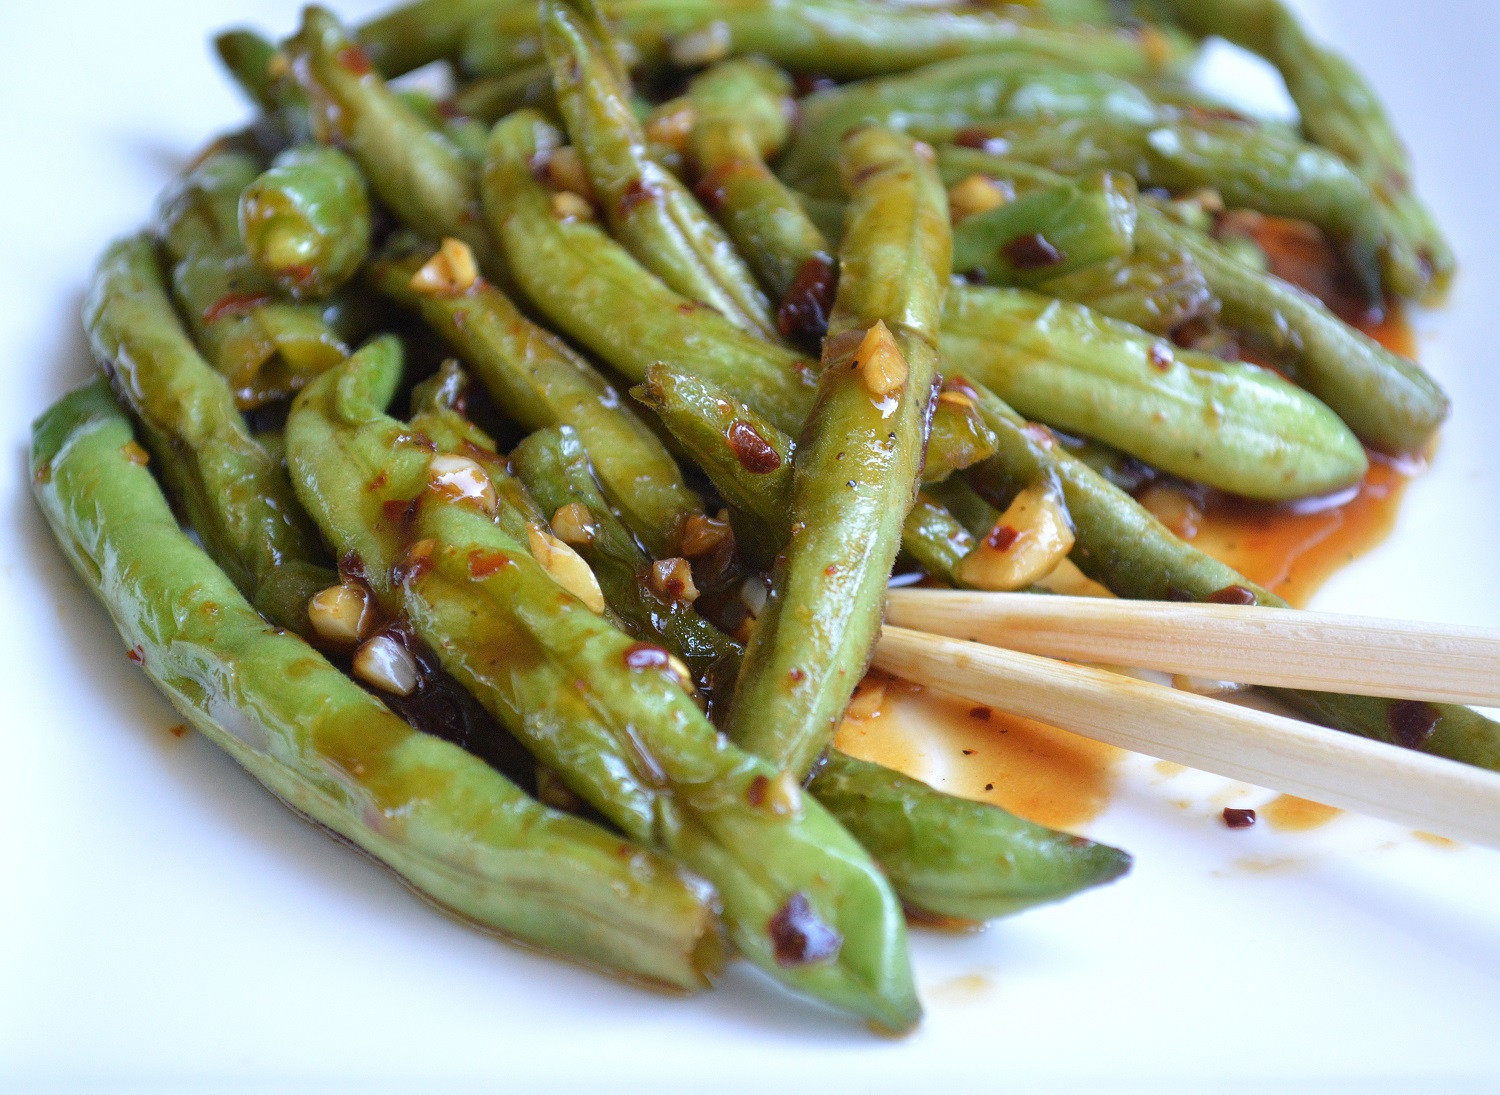 Spicy Green Bean
 PF Chang s Spicy Green Beans Souffle Bombay